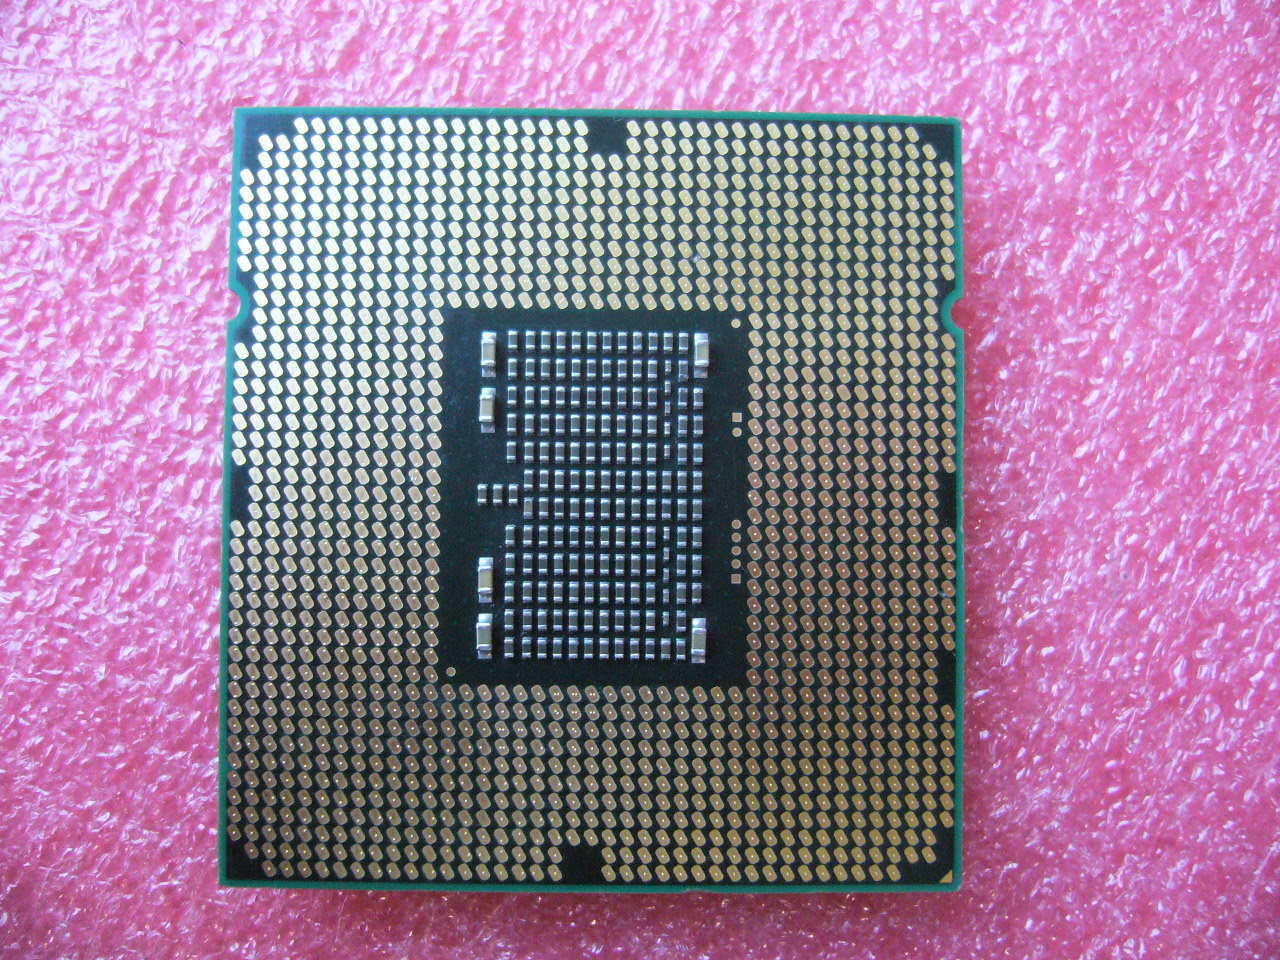 QTY 1x INTEL Quad-Cores CPU L5630 2.13GHZ/12MB 5.86GT/s TDP 40W LGA1366 SLBVD - Click Image to Close